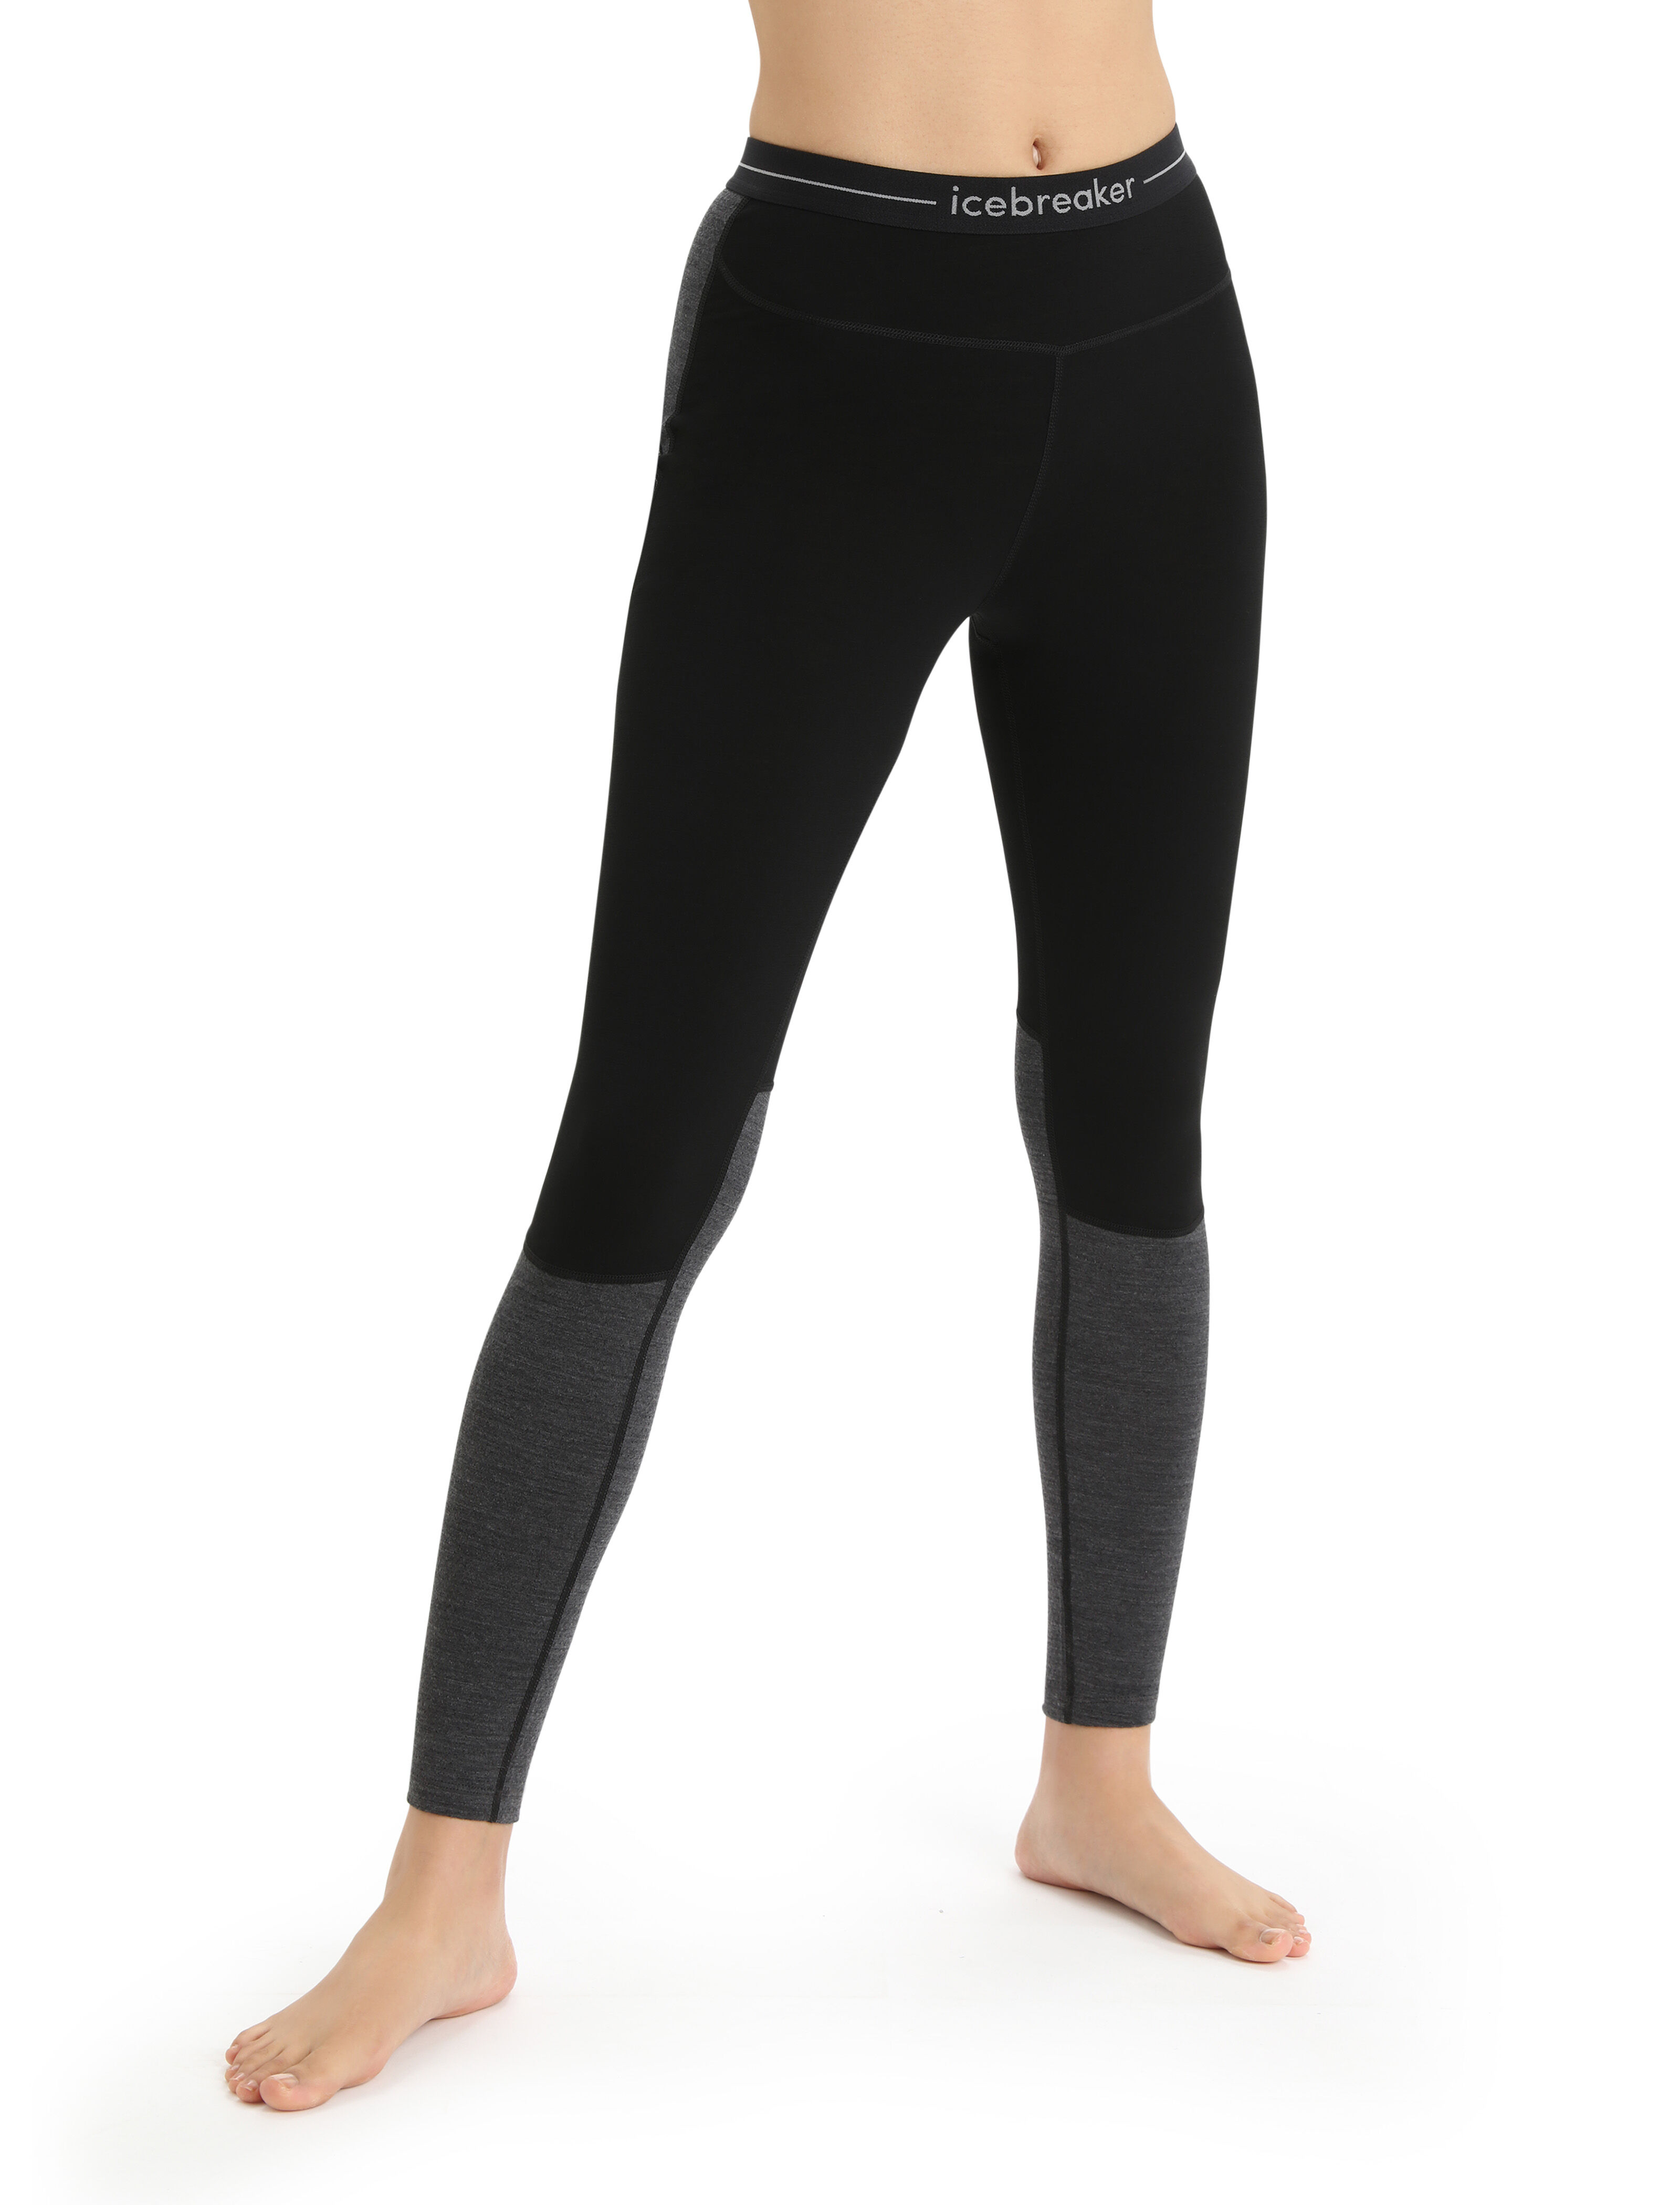 Up To 72% Off on 6 Pack Women's Thermal Tights... | Groupon Goods